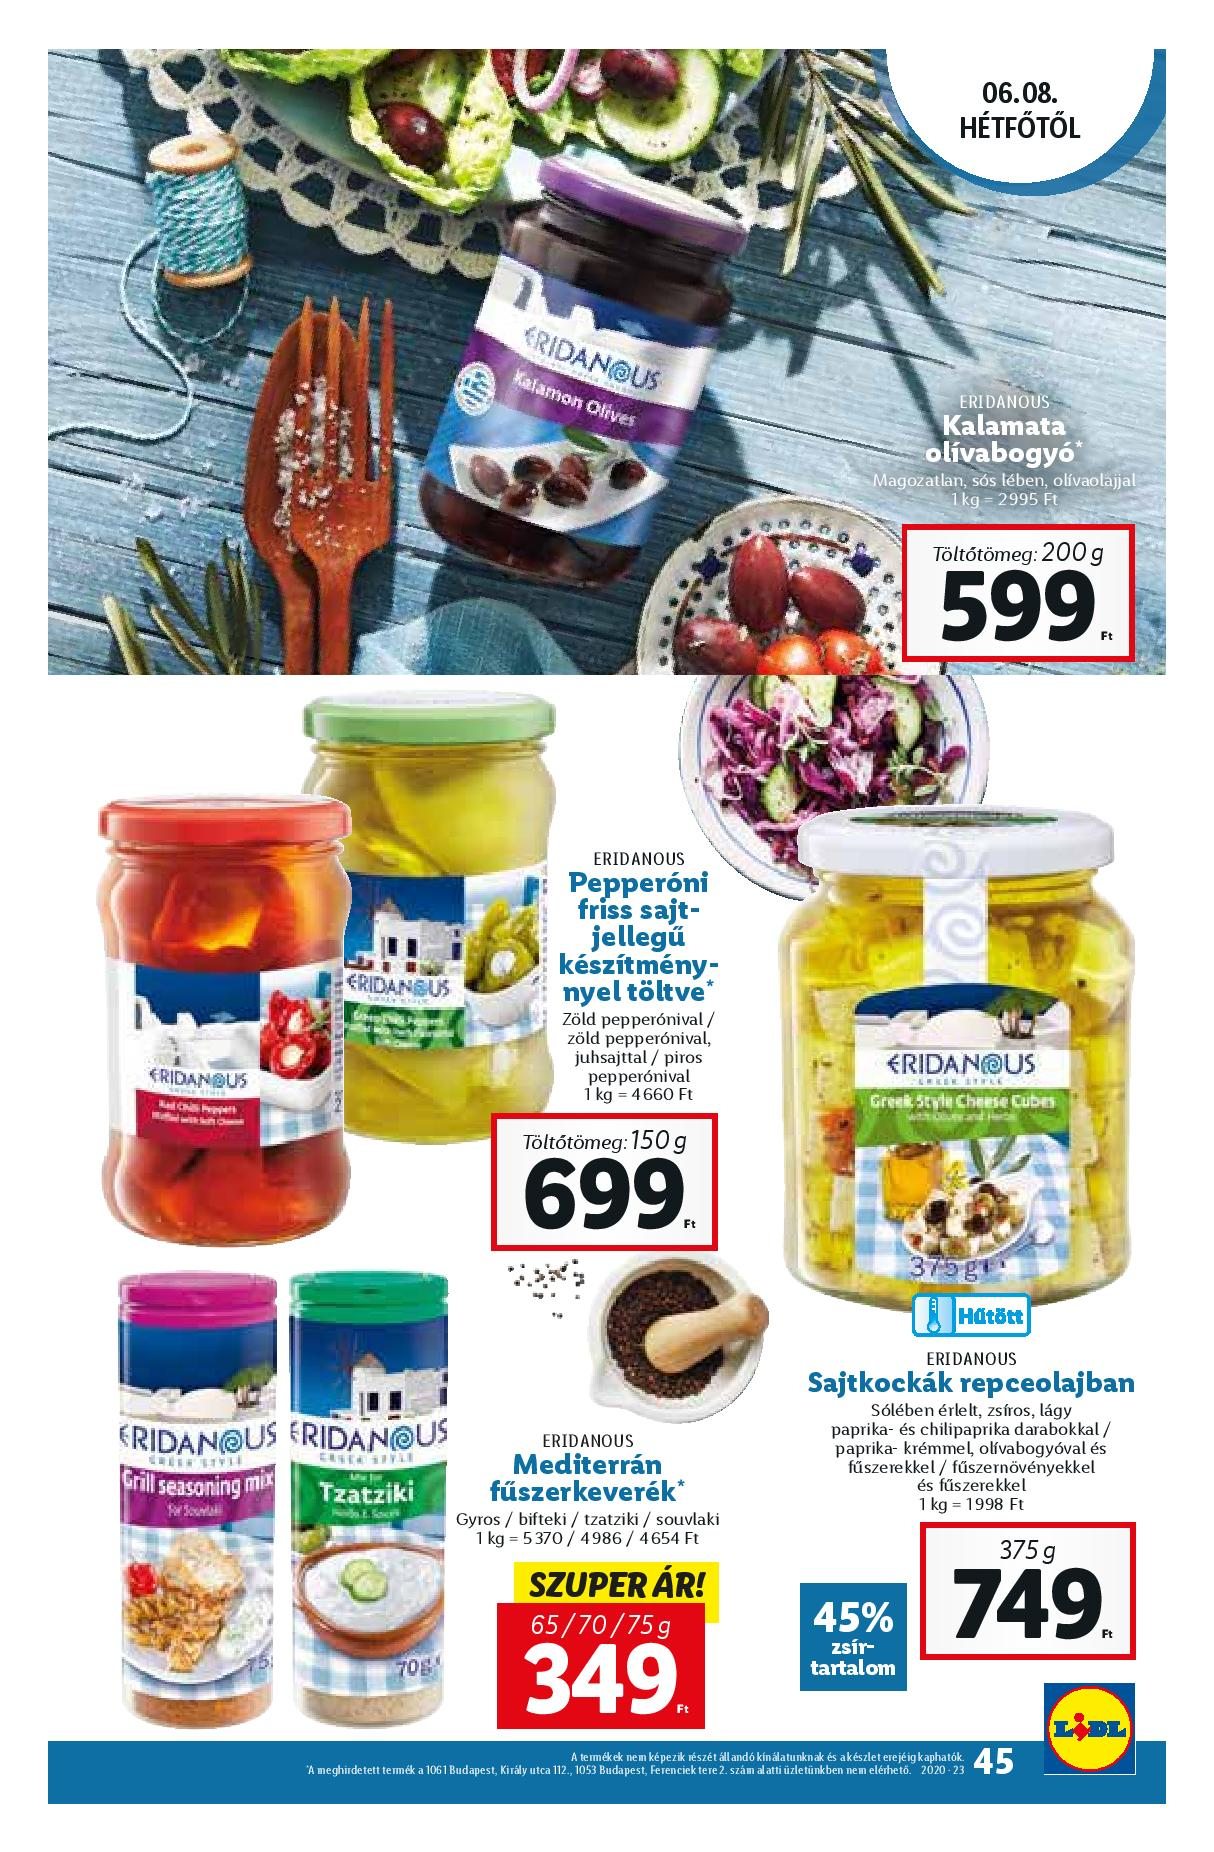 lidl0604-page-045